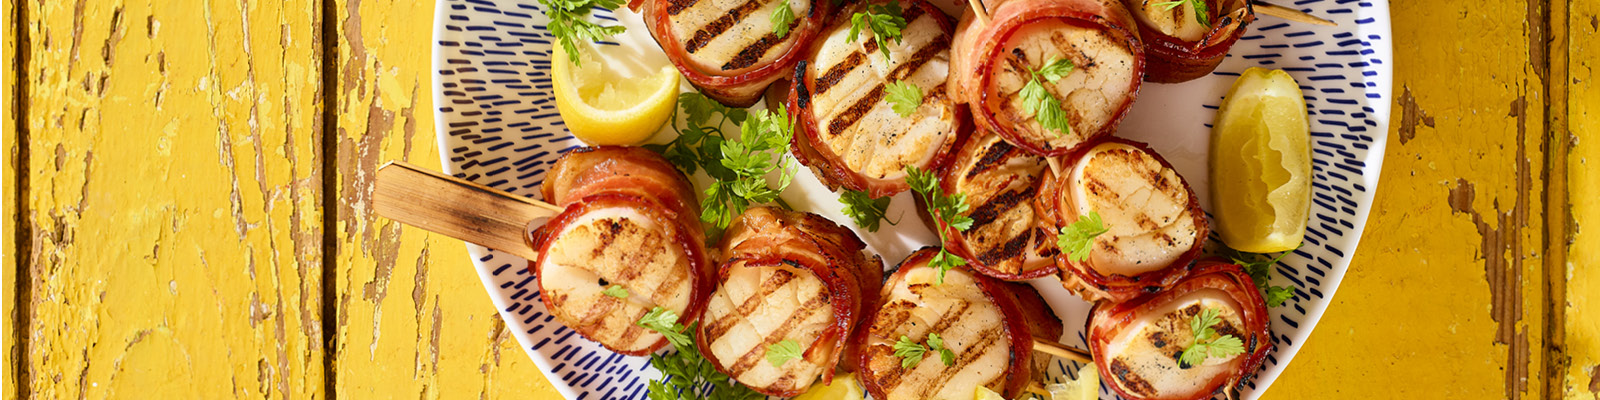 2022 May June CC_Bacon Wrapped Grilled Scallops_HR 1600x400.jpg